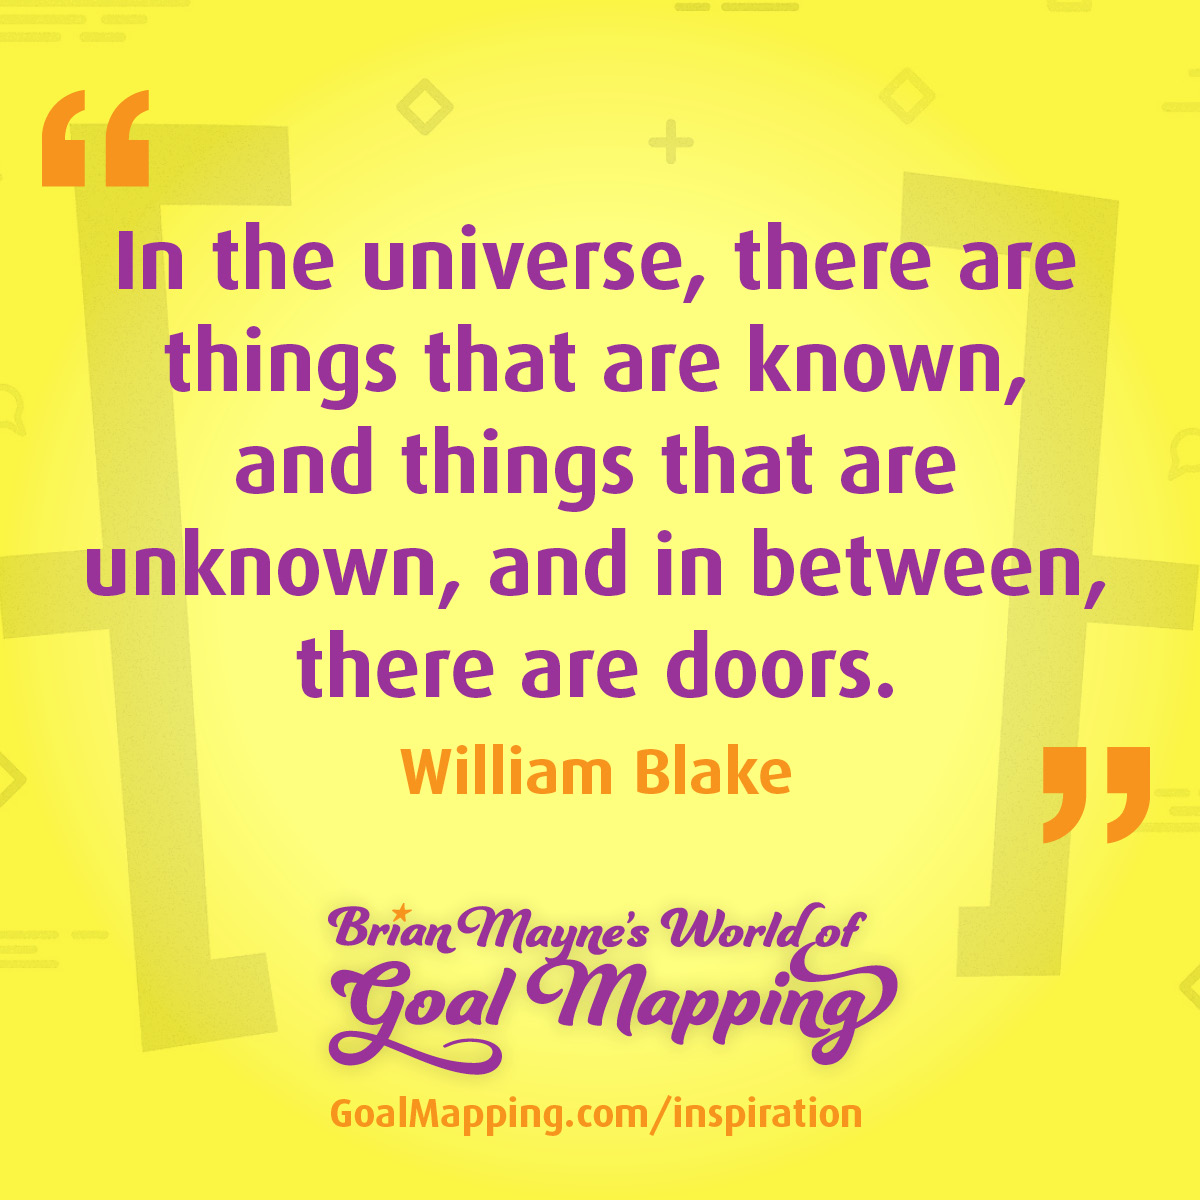 "In the universe, there are things that are known, and things that are unknown, and in between, there are doors." William Blake